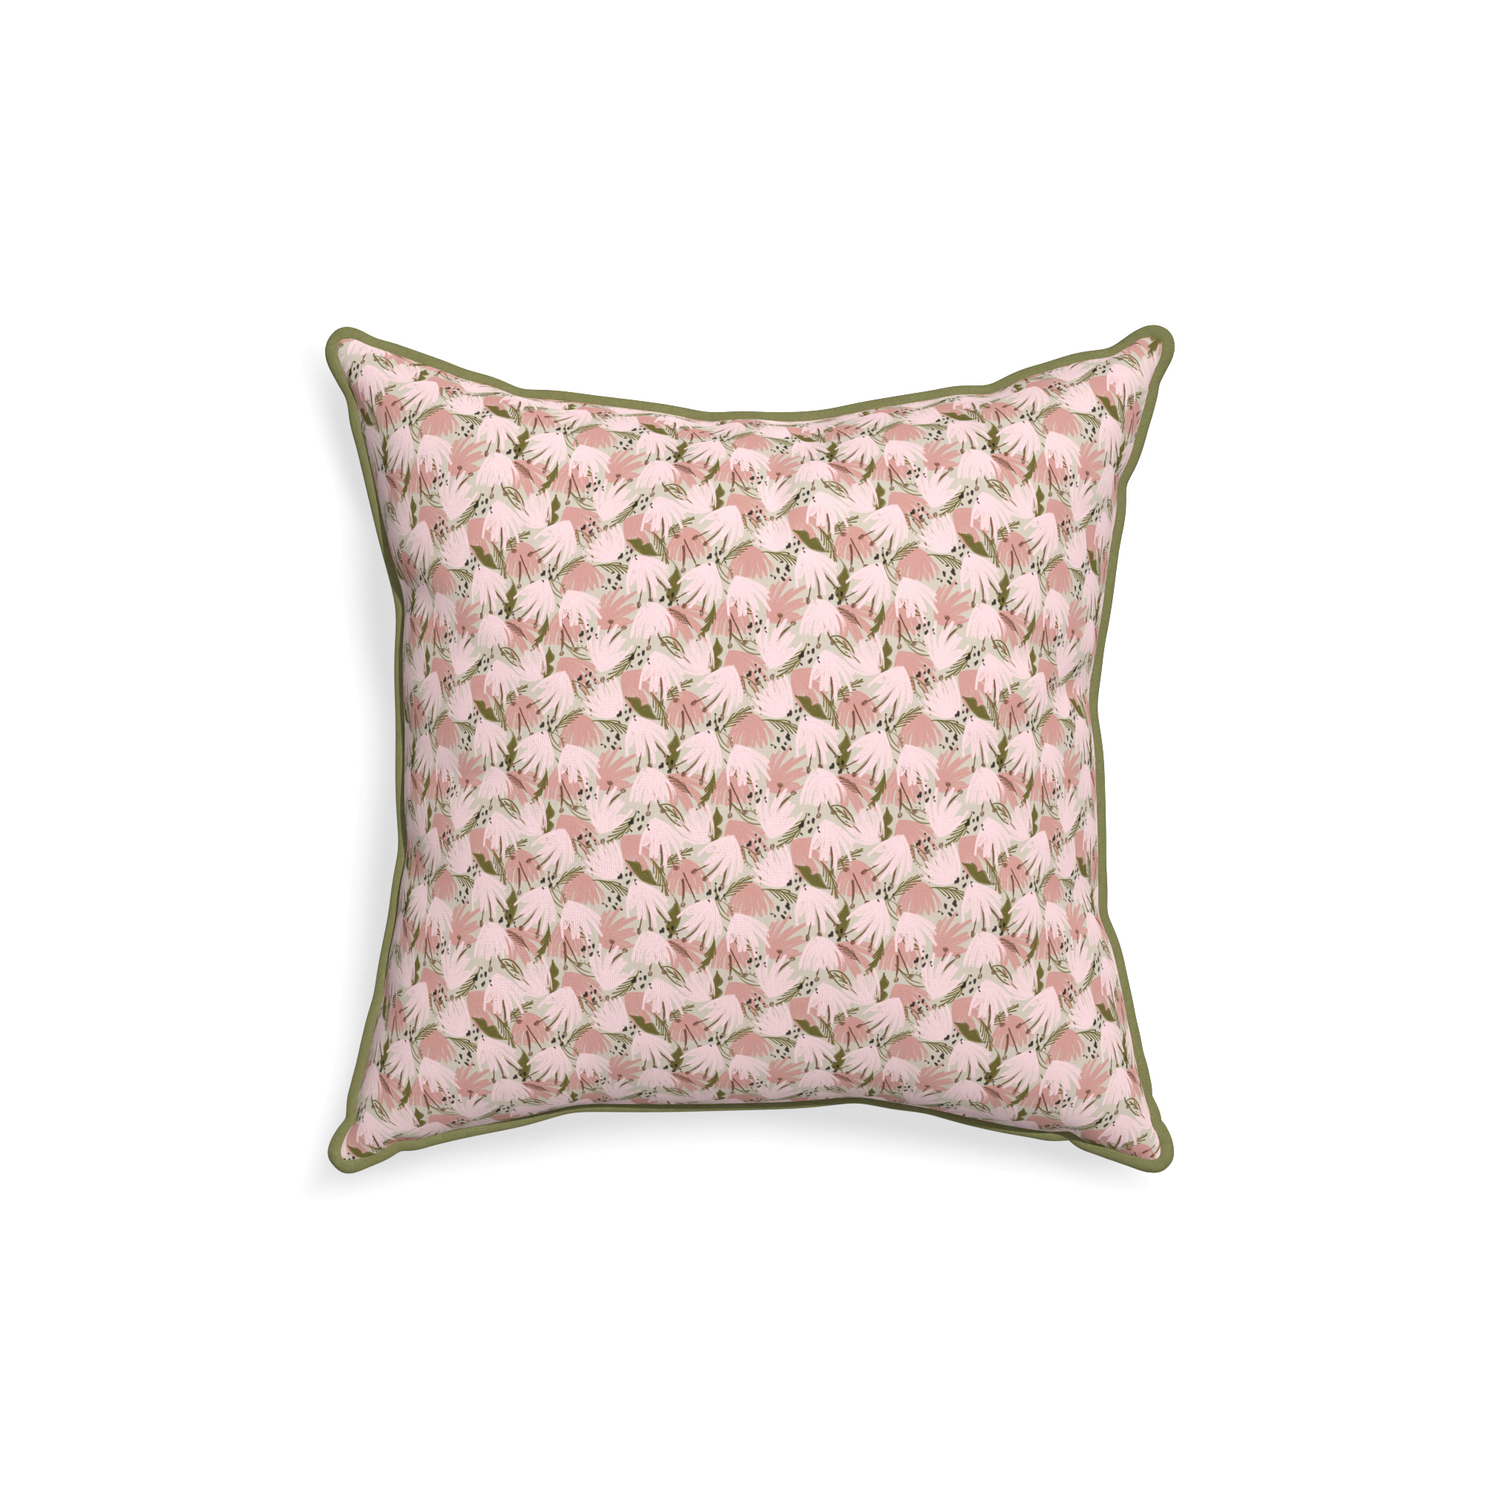 18-square eden pink custom pink floralpillow with moss piping on white background